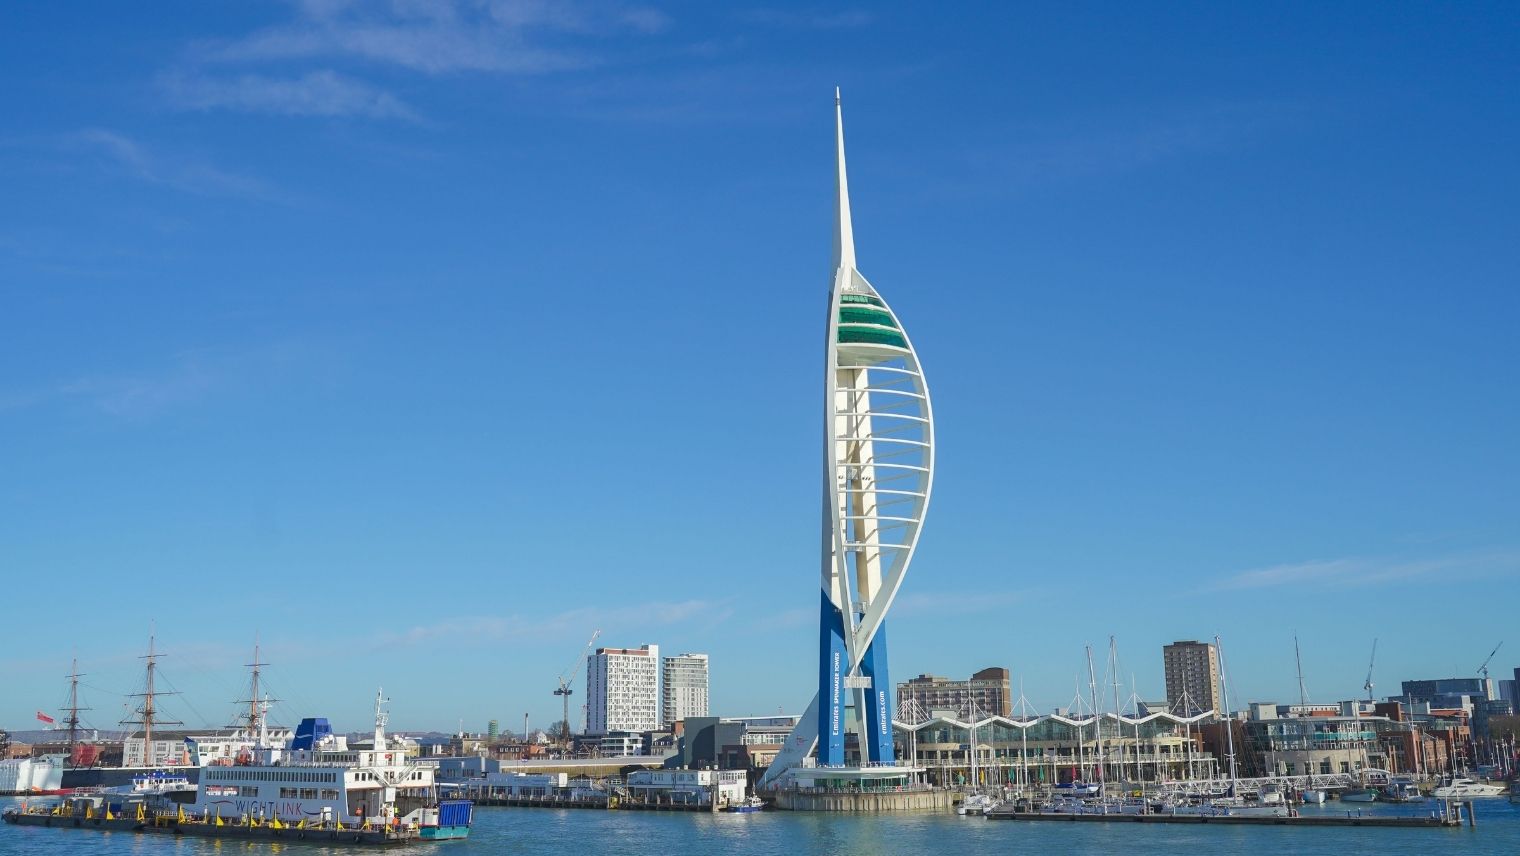 View of the Spinnaker Tower from the water